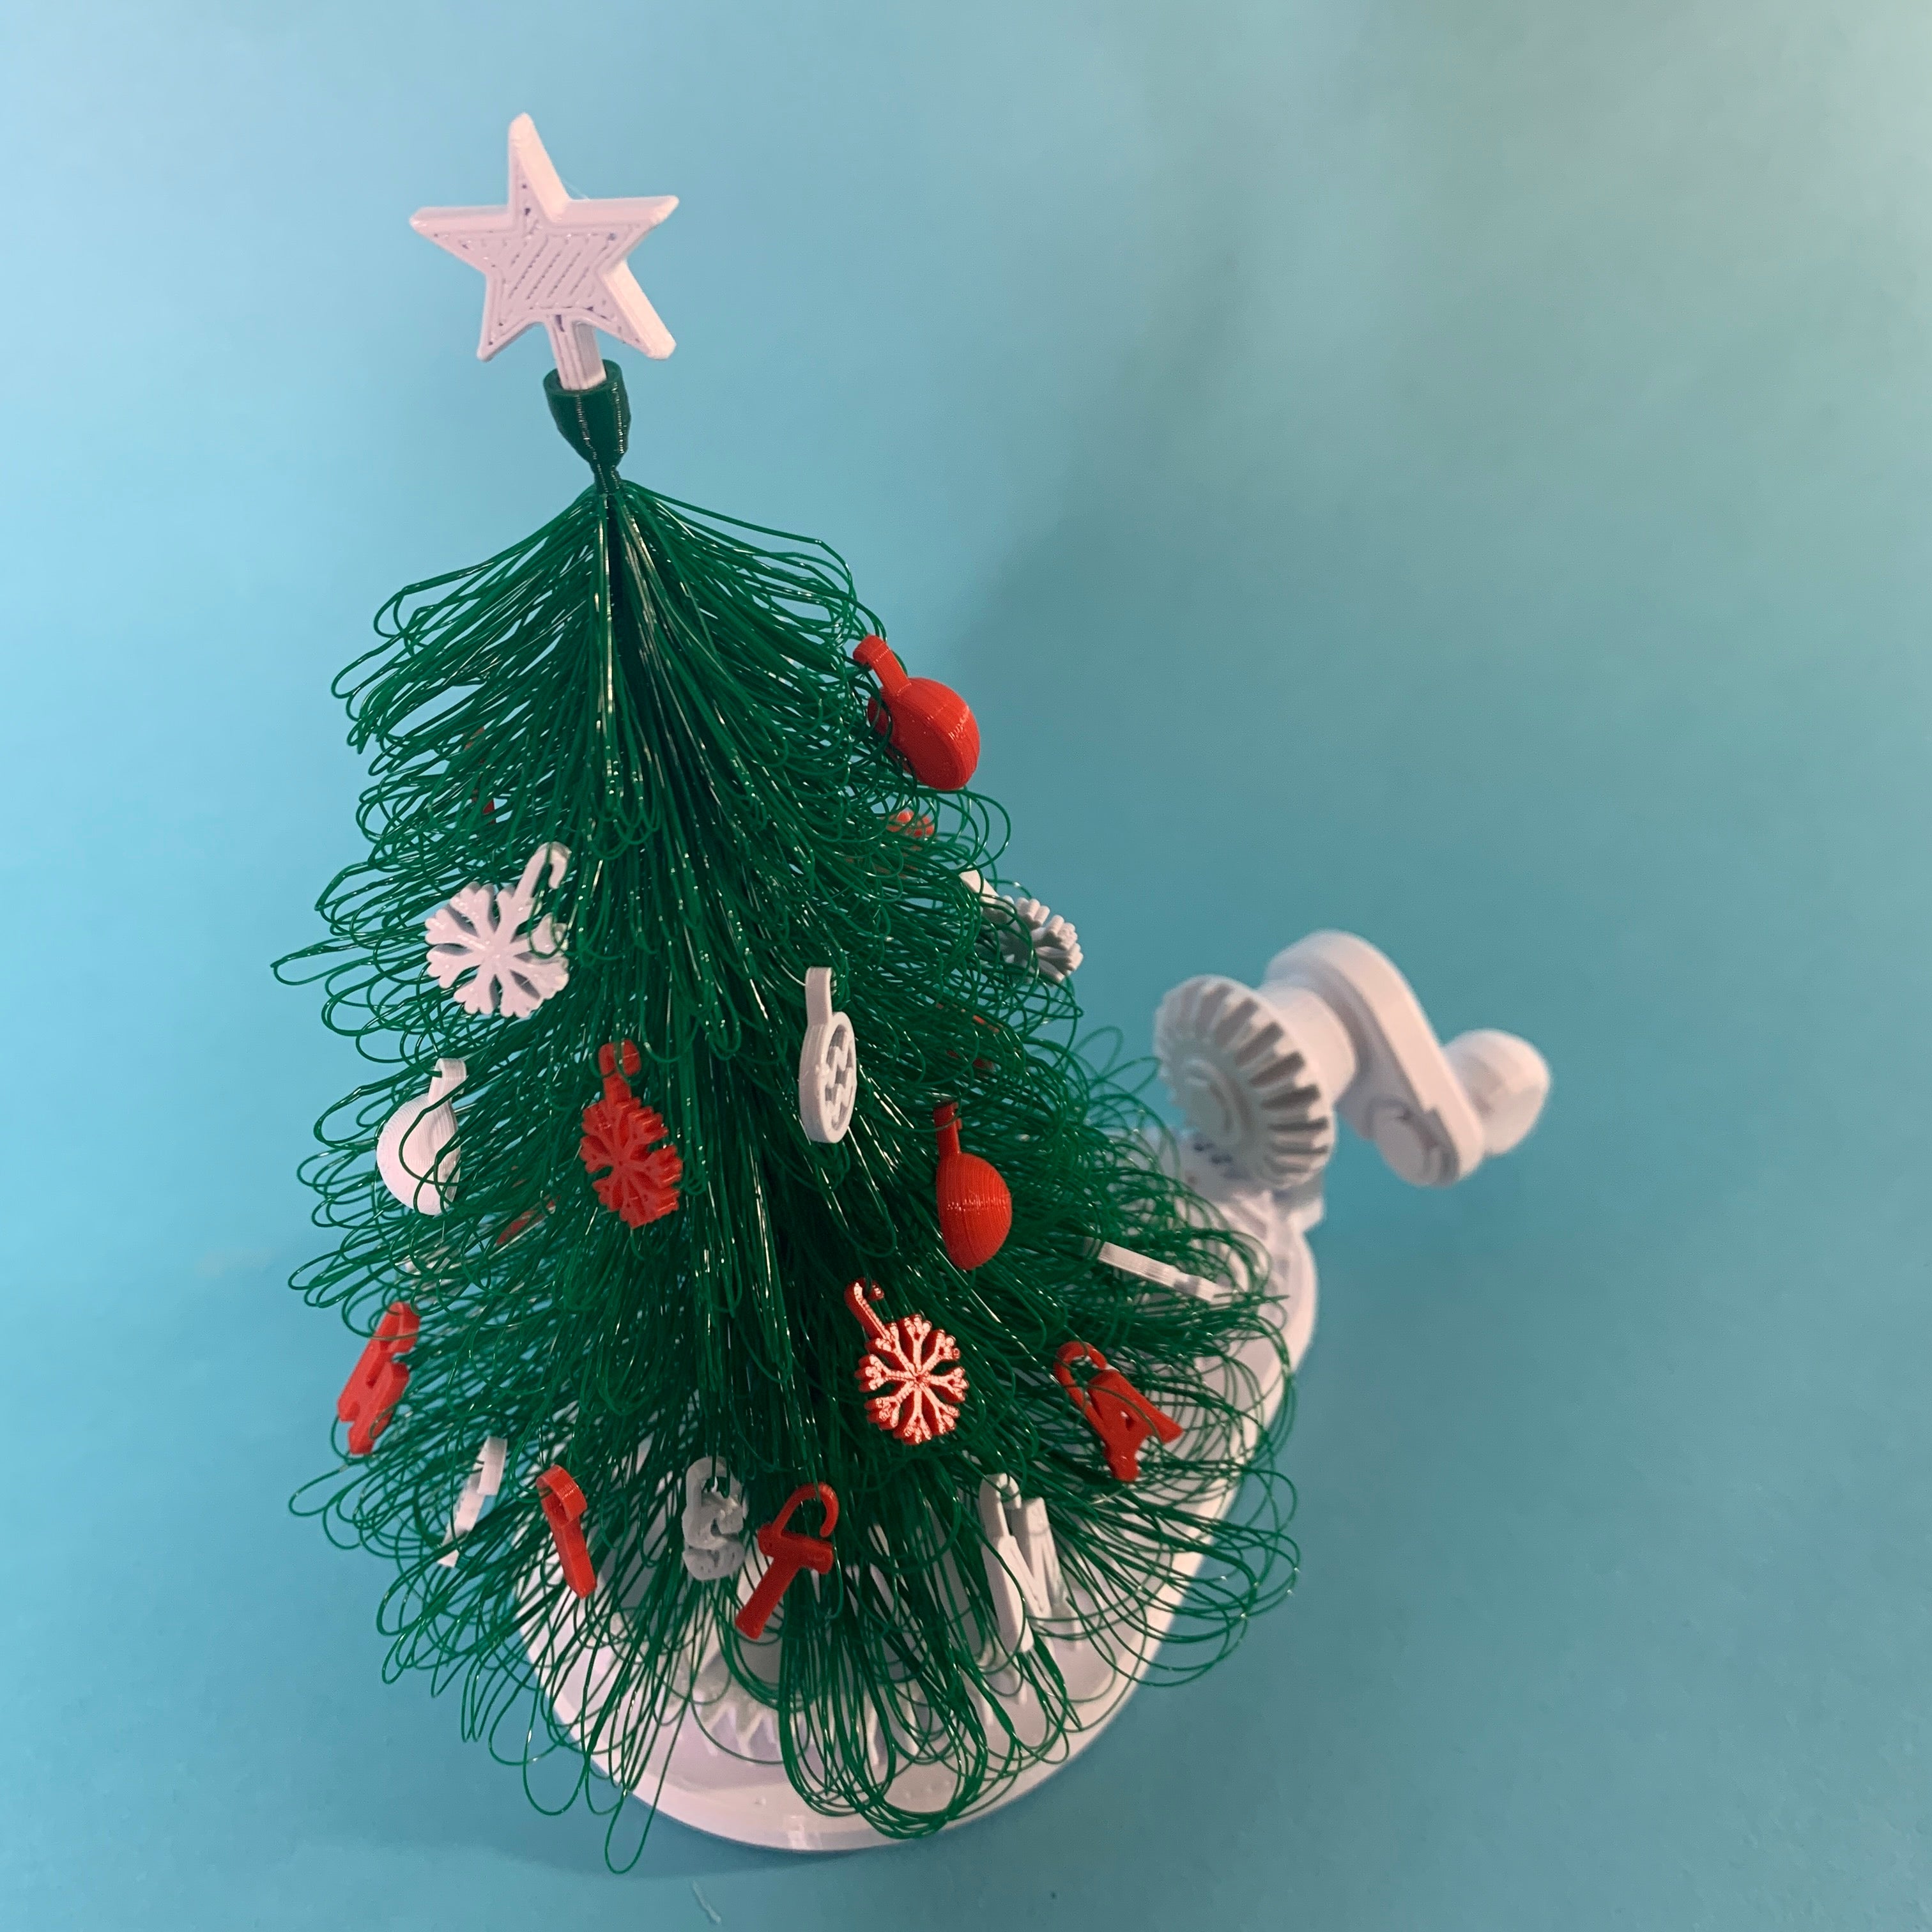 Fuzzy Christmas Tree Kinetic Sculpture